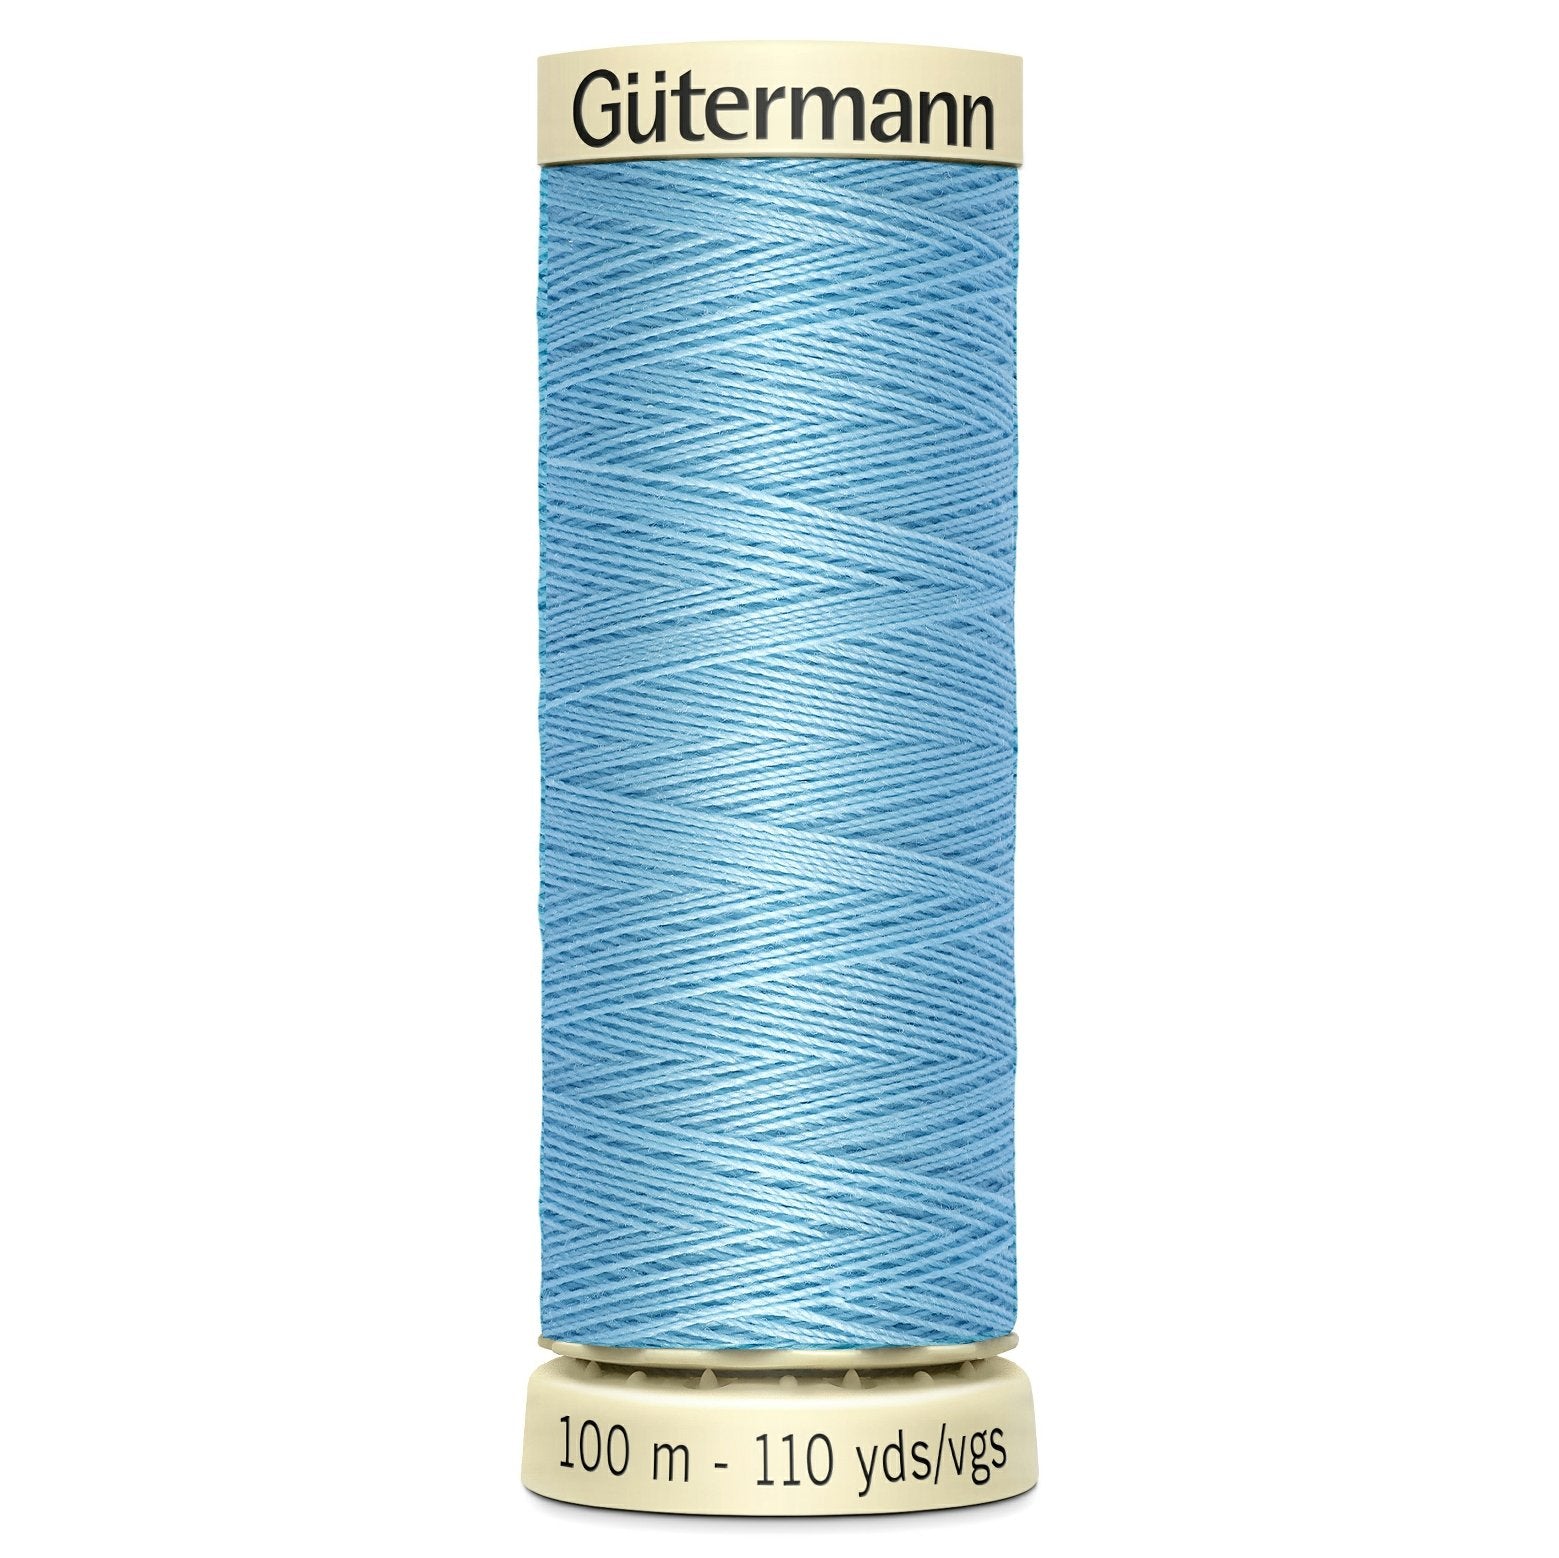 Gutermann Sew-All Sewing Thread | 196 Pale Blue from Jaycotts Sewing Supplies